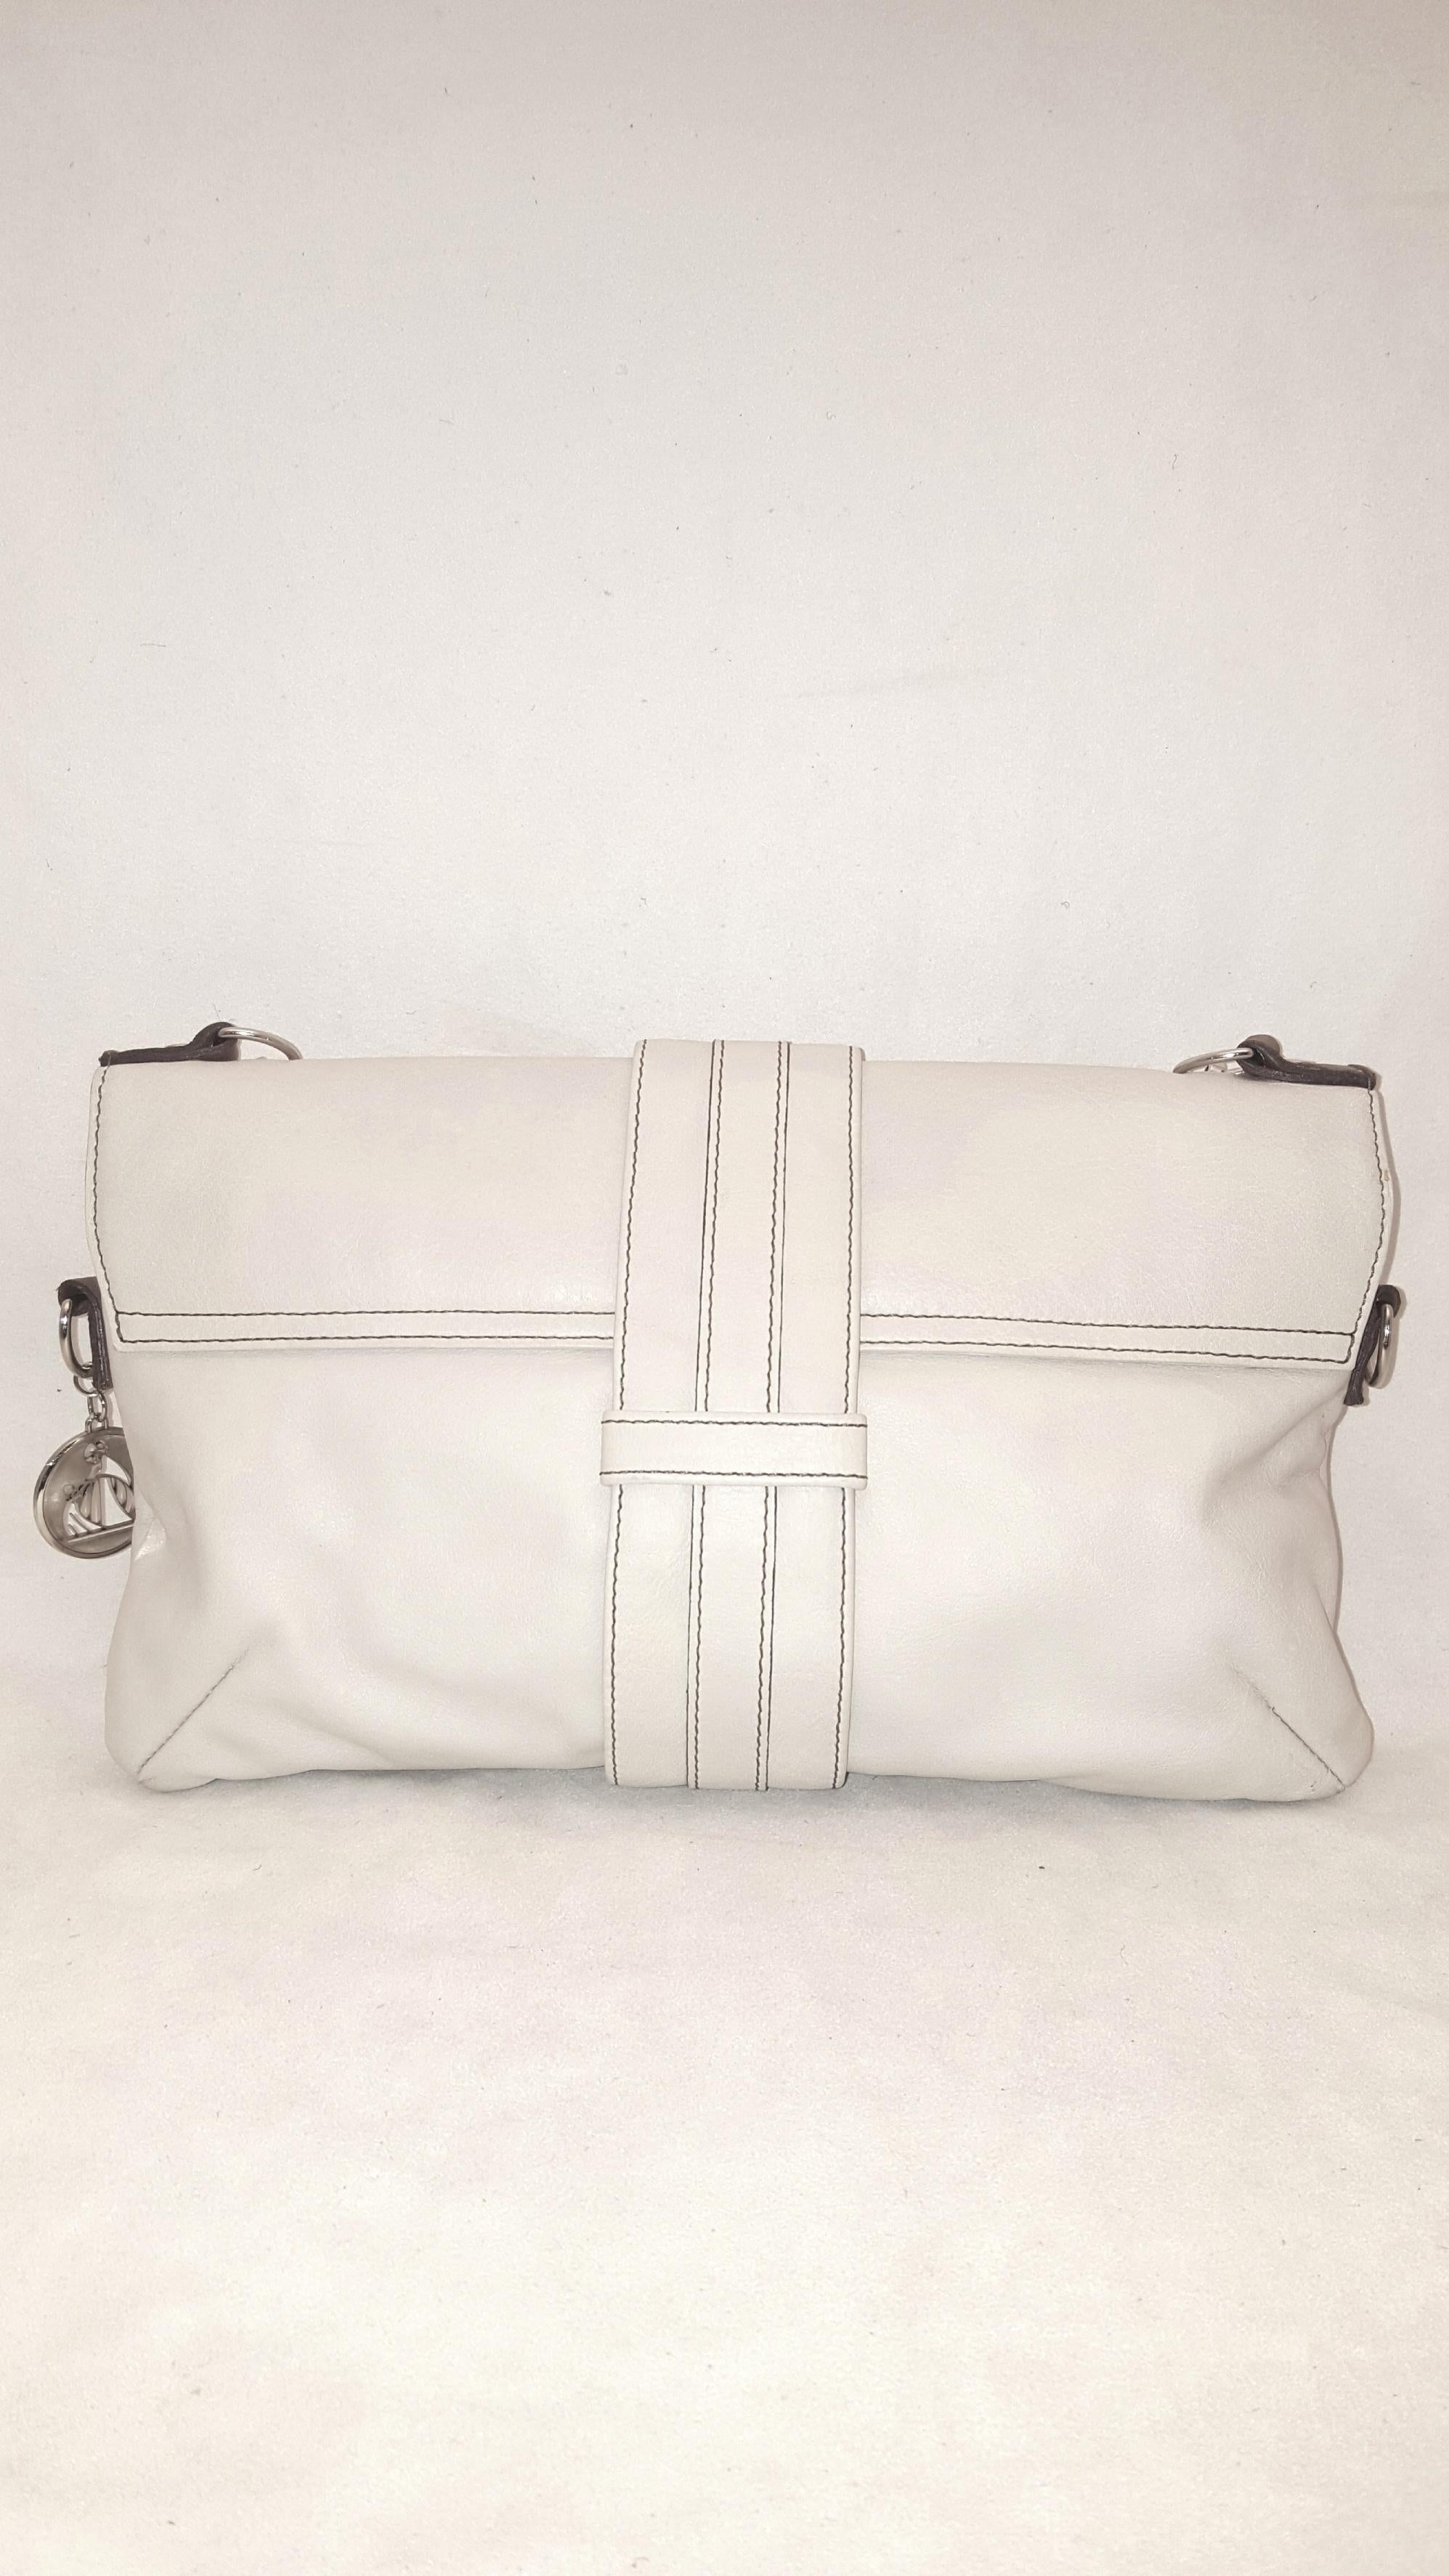 Lanvin ivory leather Hero bag with rolled brown top handle is decorated with three wrap straps around middle of bag.   This bag contains a single flap and push lock closure in gold tone.  Bag is lined in Lanvin logo ivory jacquard with single